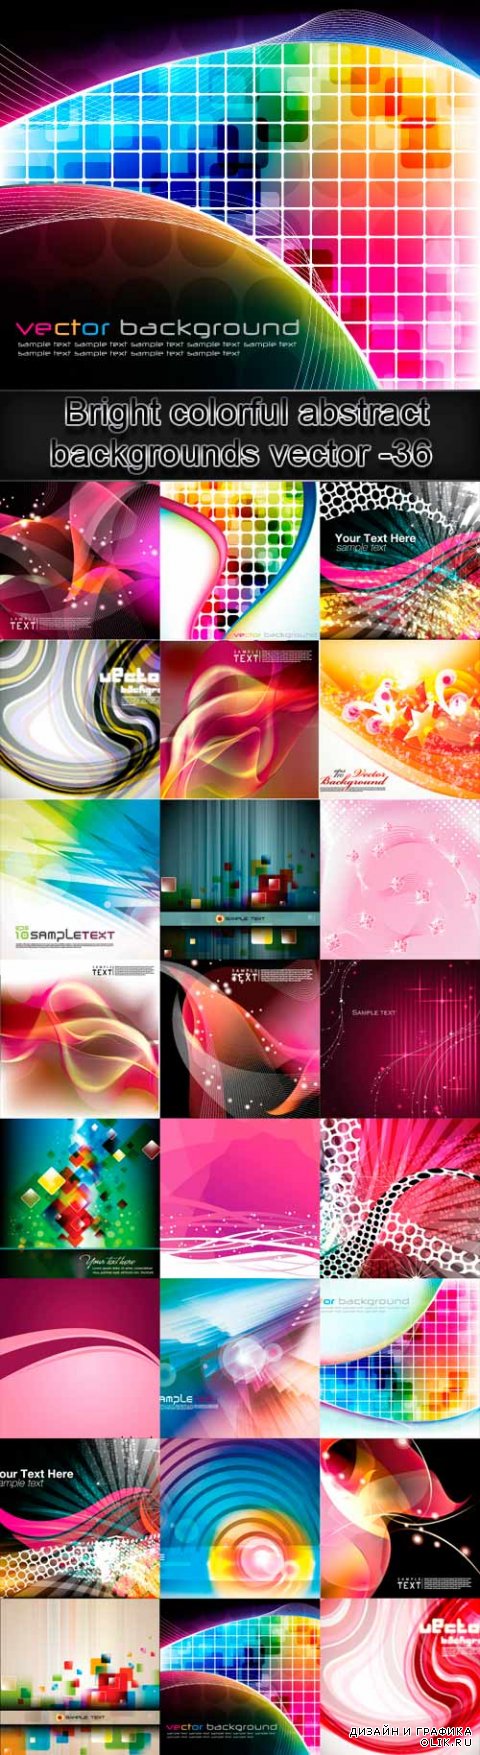 Bright colorful abstract backgrounds vector -36